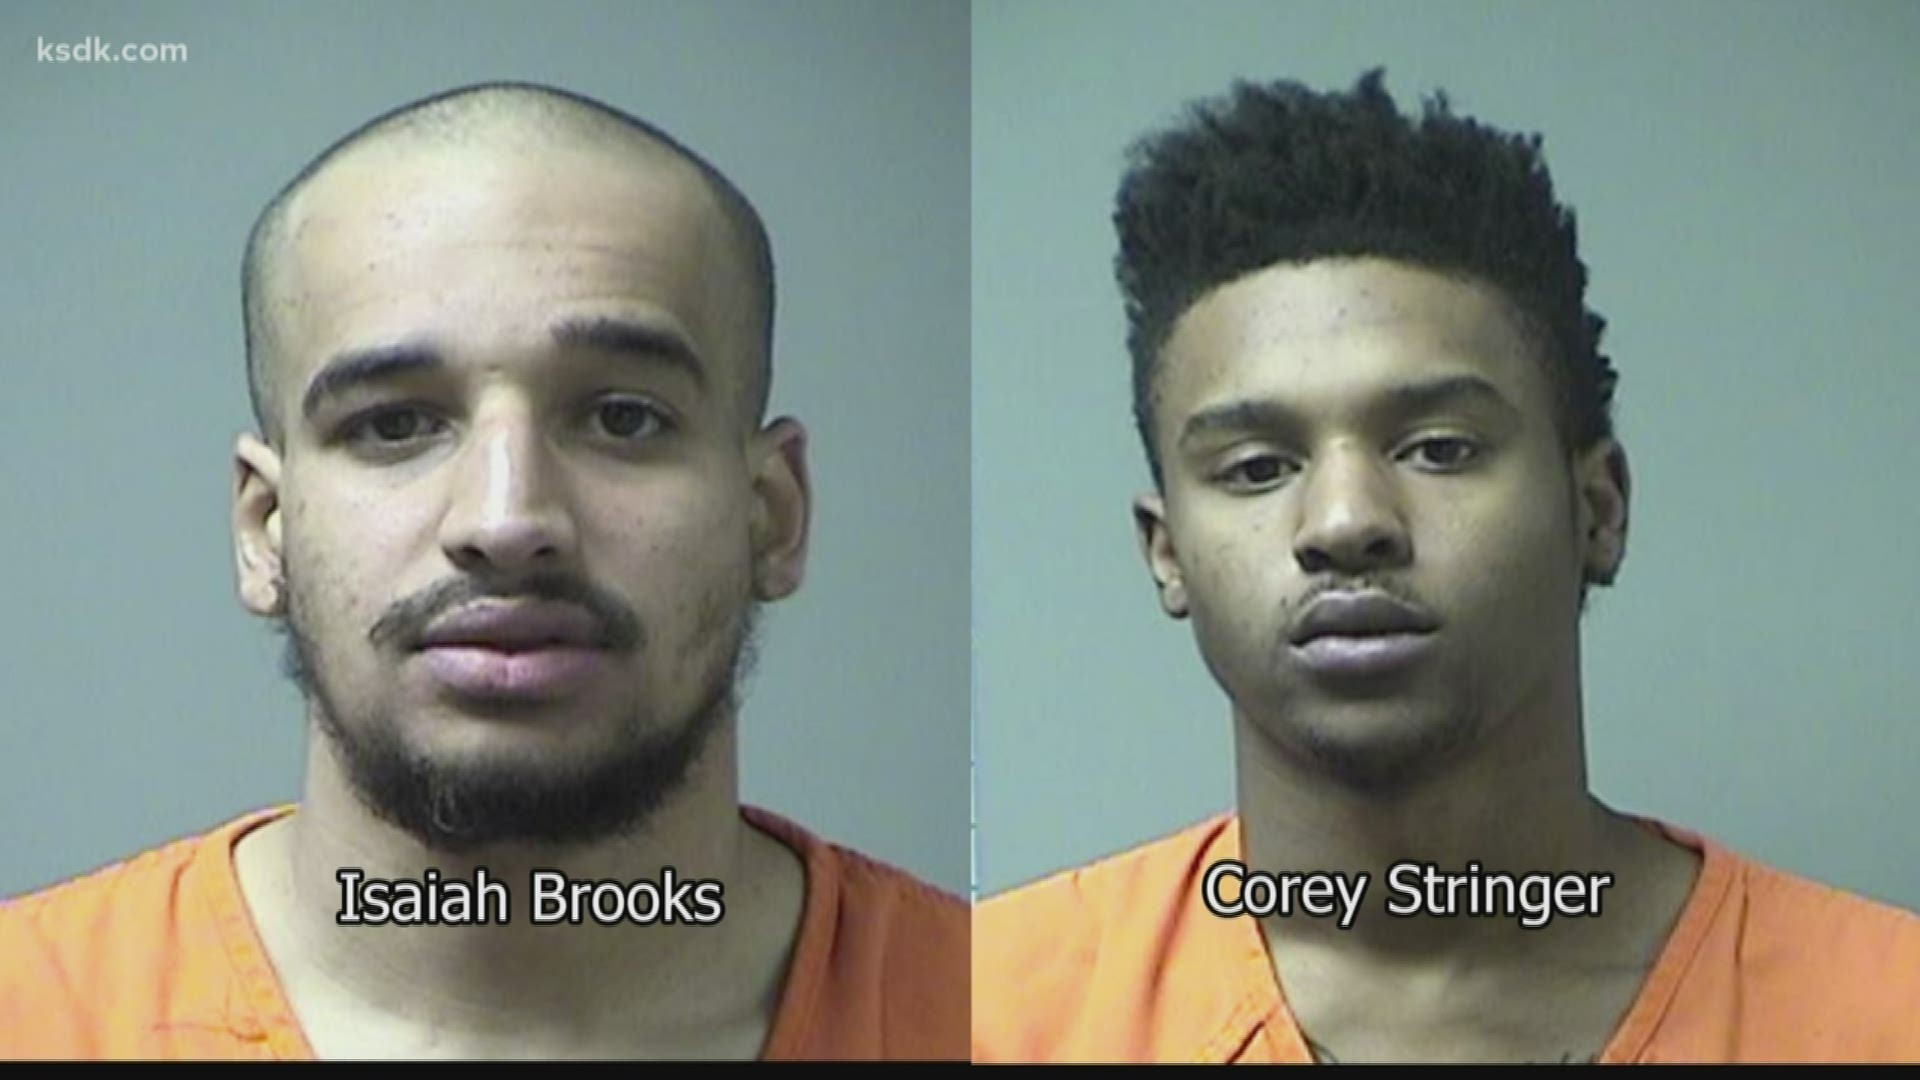 Three men are facing charges after the sale of designer shoes led to shots being fired in St. Charles over the weekend